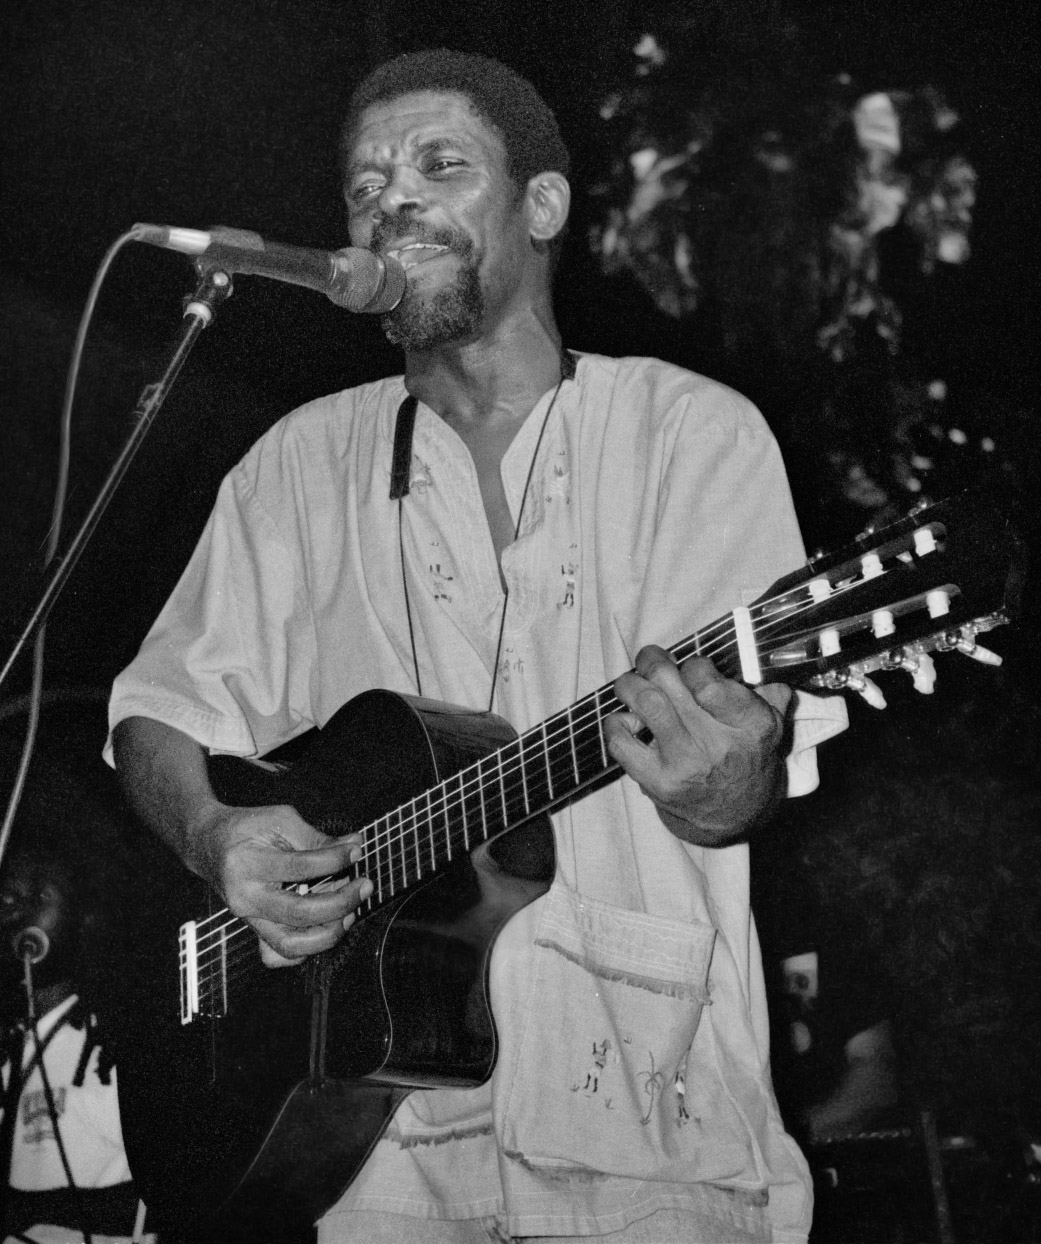 Manno Charlemagne playing the guitar while singing.